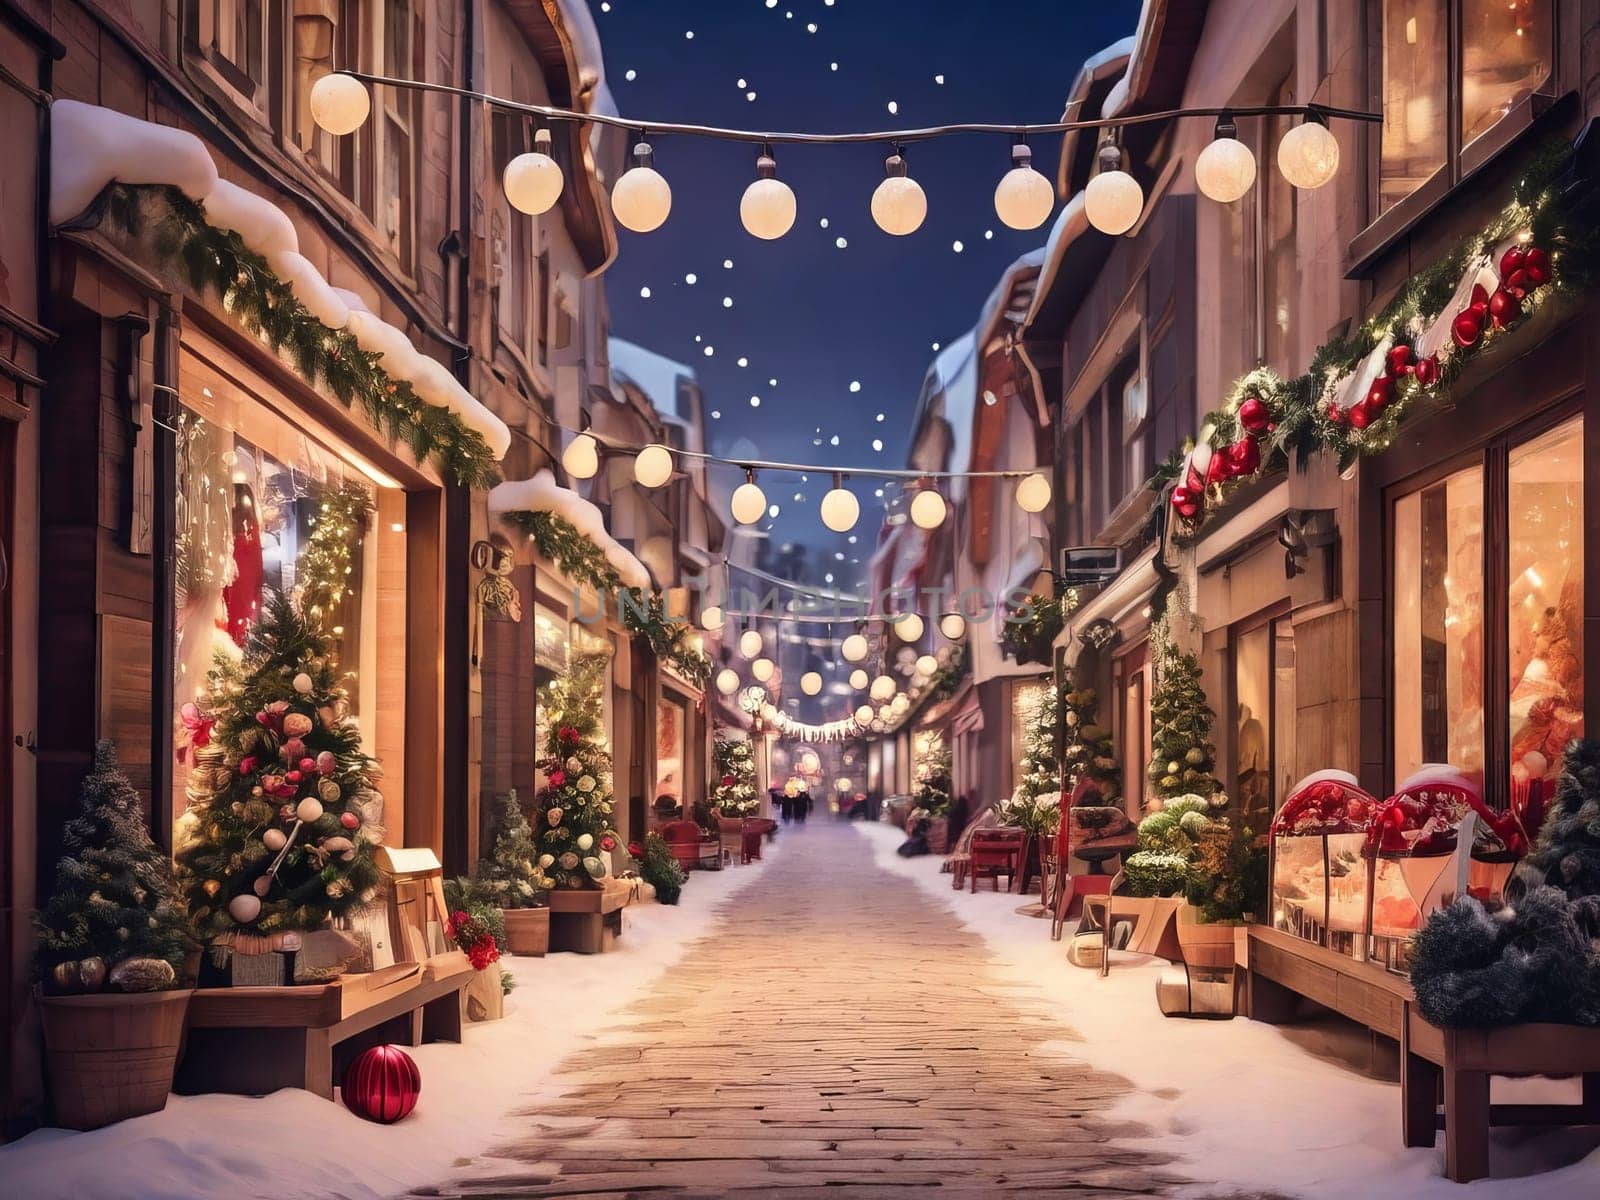 Enjoy a cozy shopping street lit up with festive decorations and lights during winter